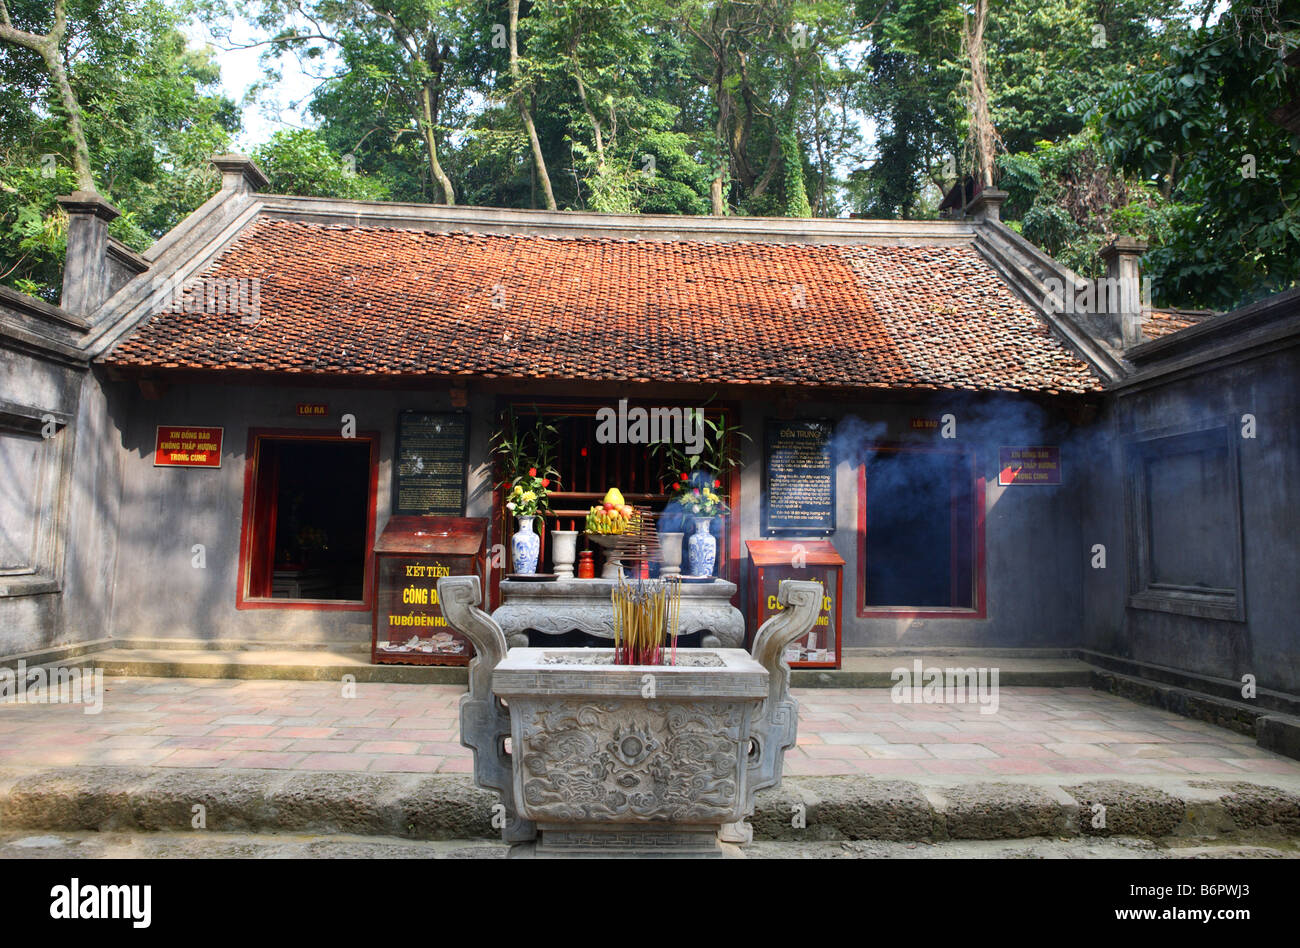 Thurible or censer outside Hung temple (Den Hung) in Phu Tho Vietnam Stock Photo